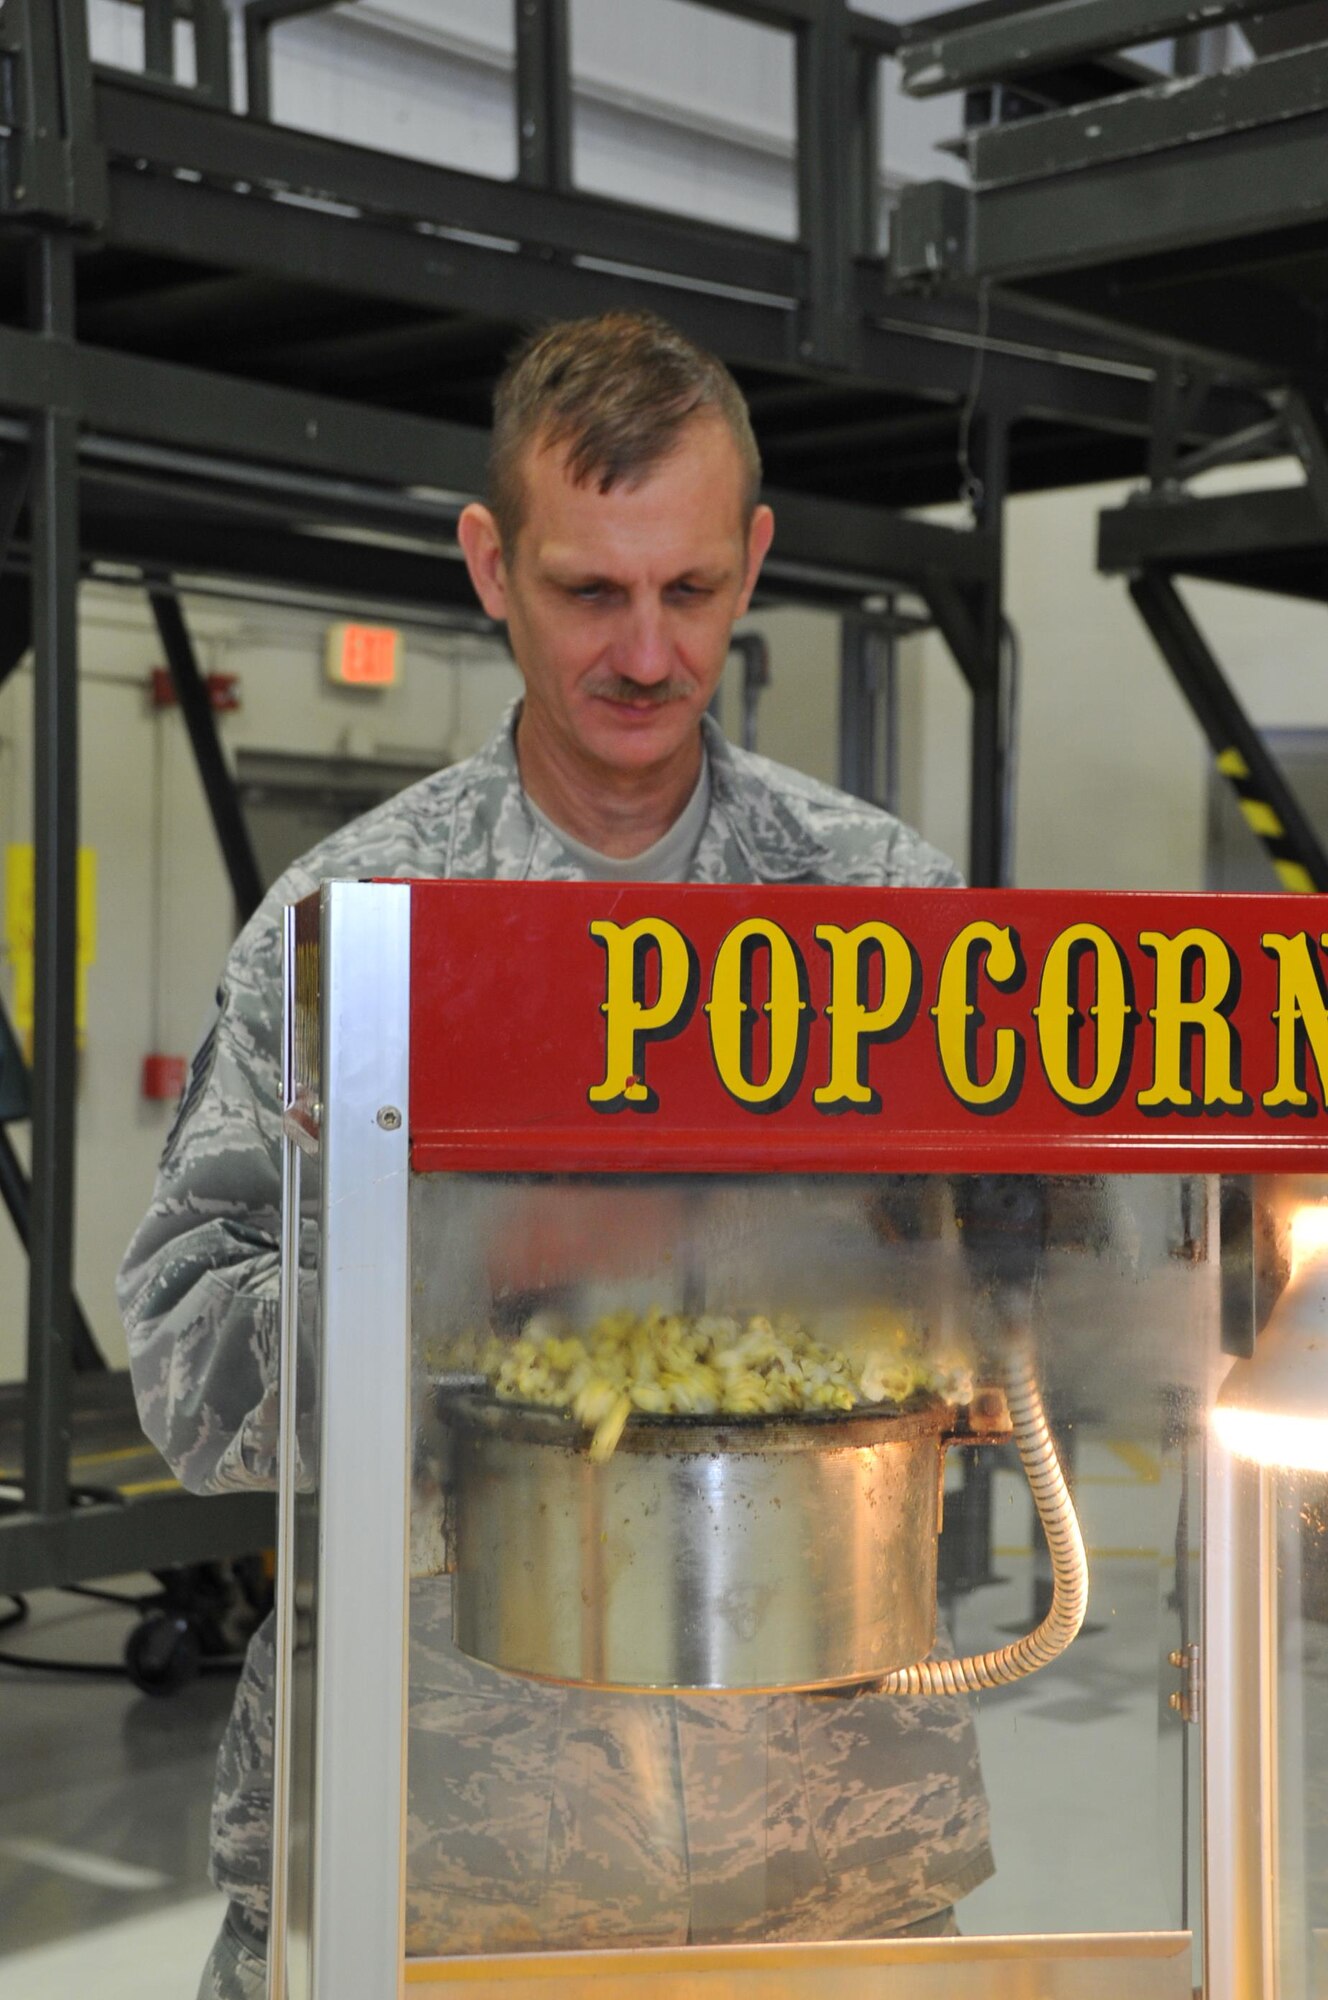 Master Sgt. Stephen Strausbaugh, a 403rd Maintenance Squadron member, prepares the popcorn for the 403rd Wing children's holiday party Dec. 3, 2016.  (U.S. Air Force photo/Master Sgt. Jessica Kendziorek)